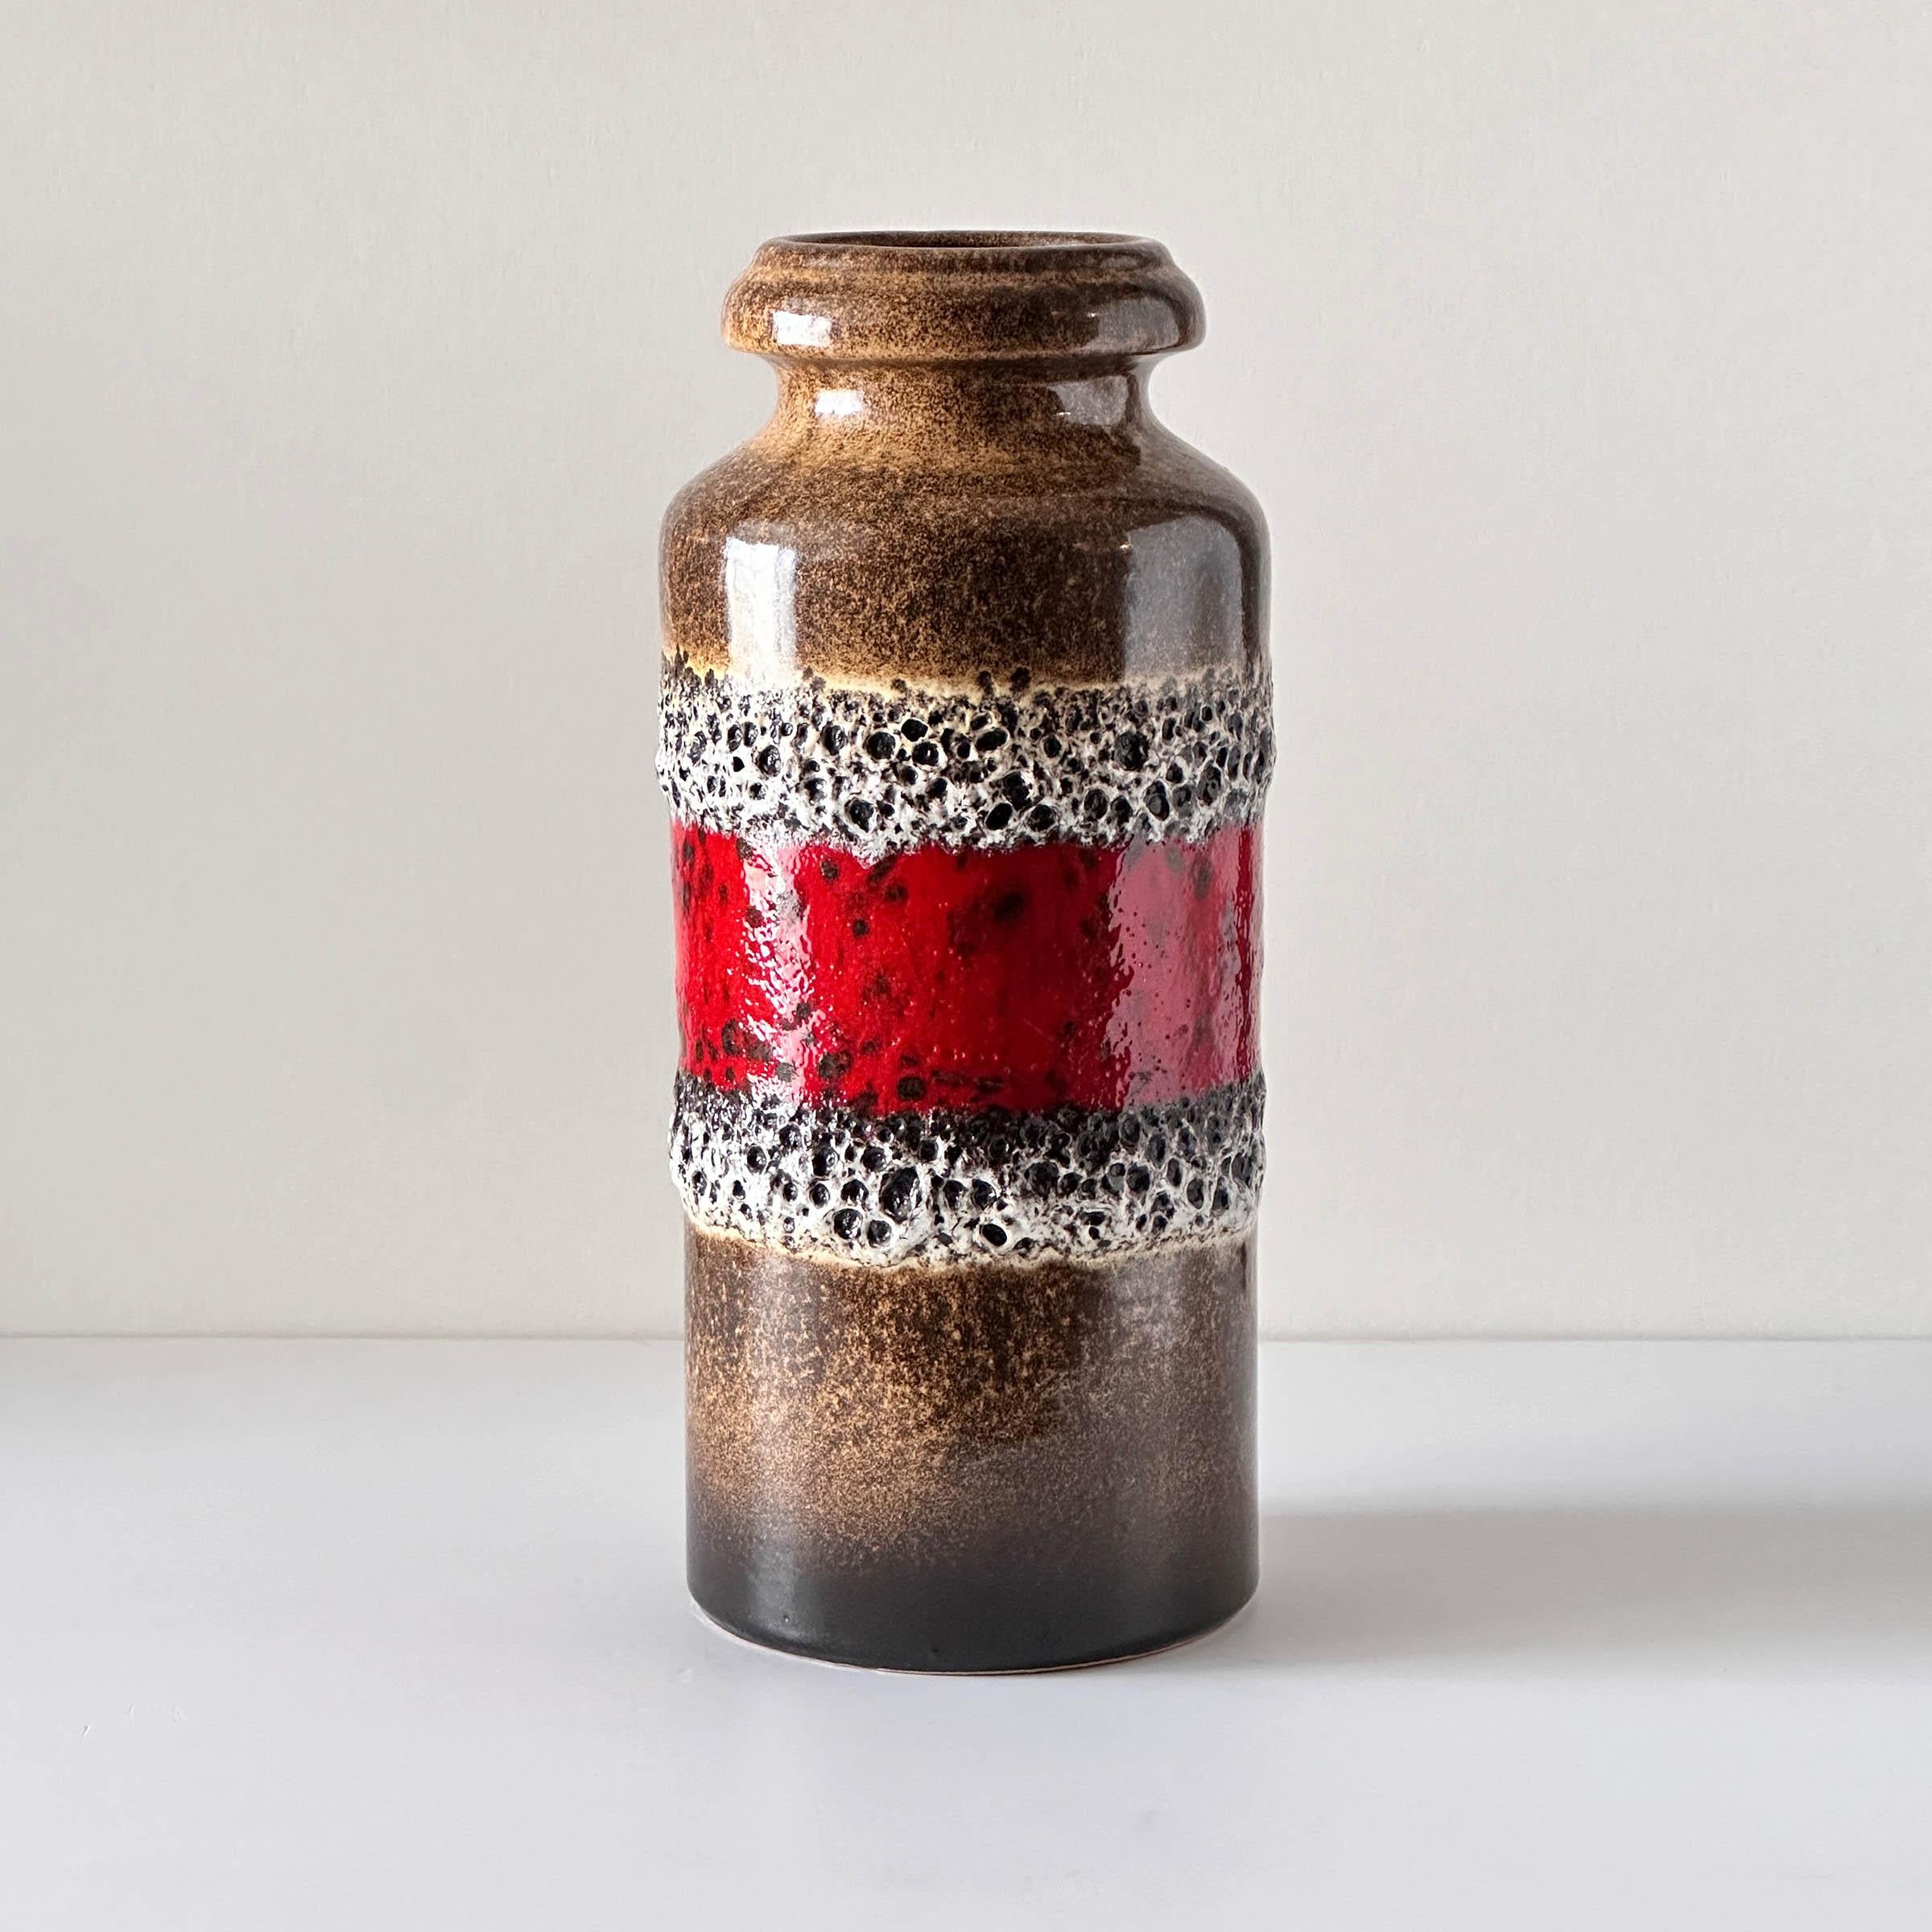 This vintage Scheurich shelf vase features alternating gloss and matte fat lava banding in black, white, and red, across a textured tobacco color glazed background. The water-tight glazed interior is black. Made in West Germany, circa 1960 – 1969.